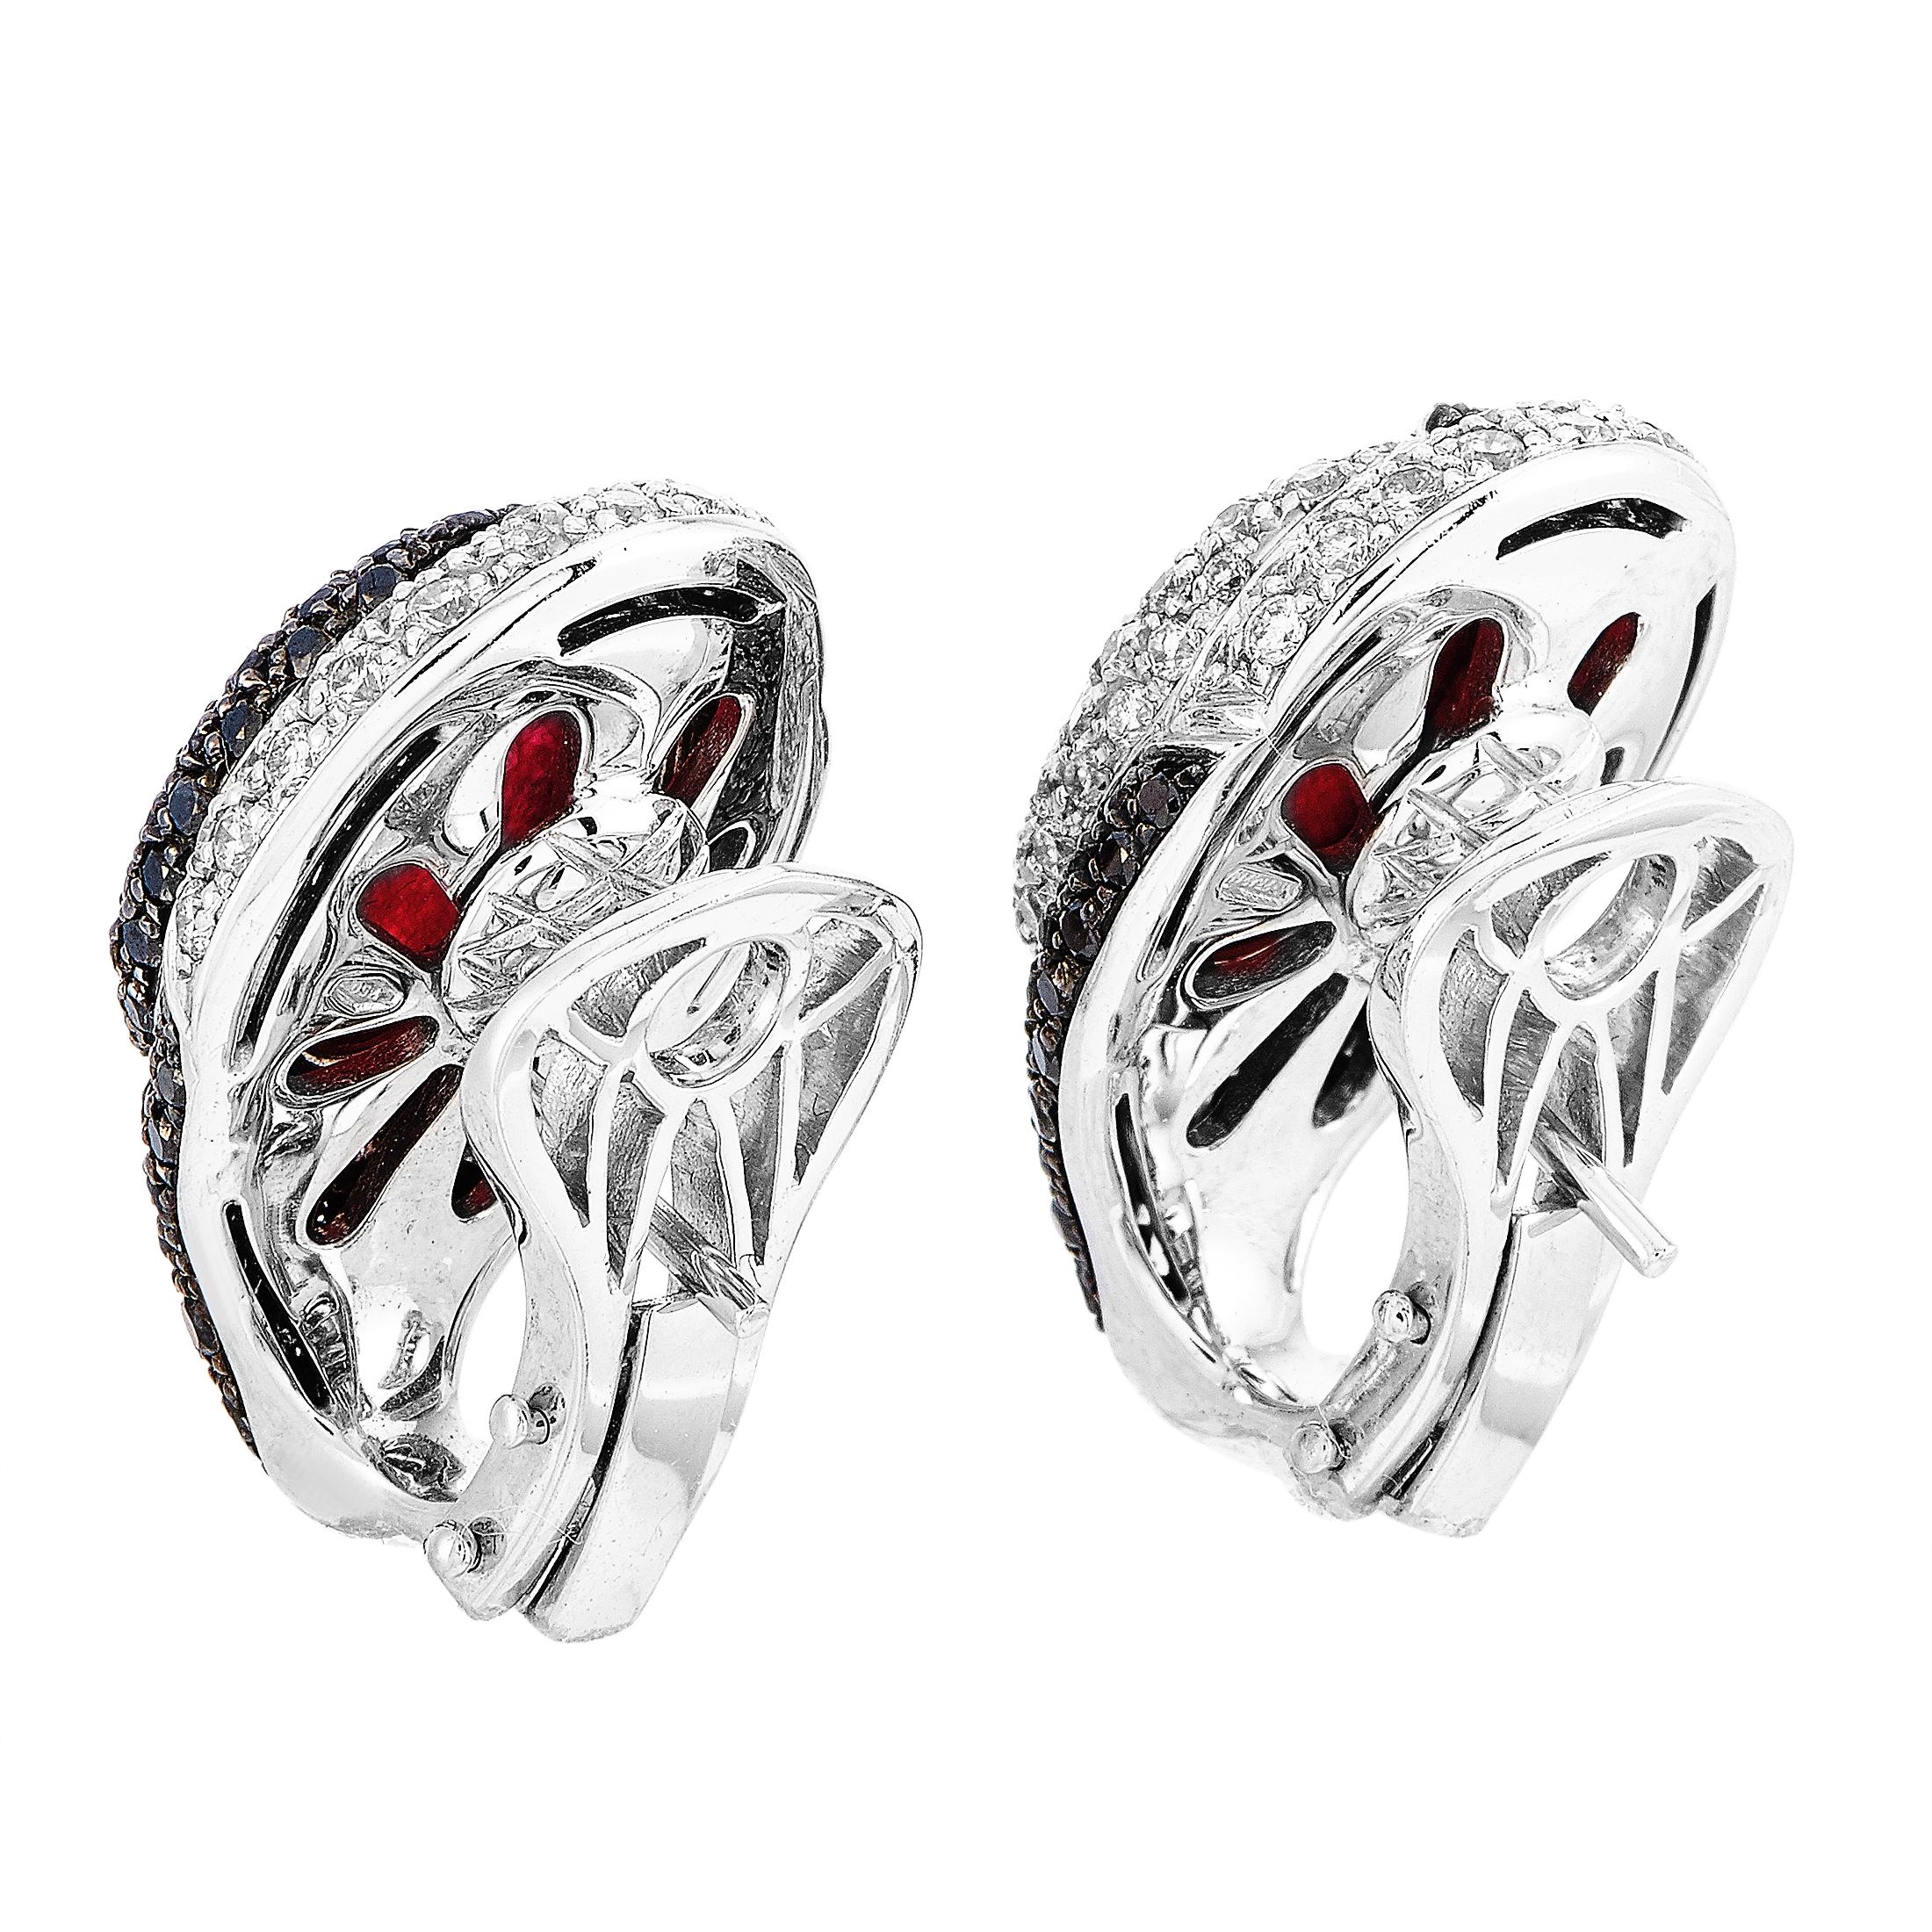 These Oro Trend earrings are crafted from 18K white gold and each of the two weighs 10.3 grams, measuring 0.88” in length and 0.65” in width. The earrings are embellished with carnelians and with white and black diamonds that total 1.25 and 2.15